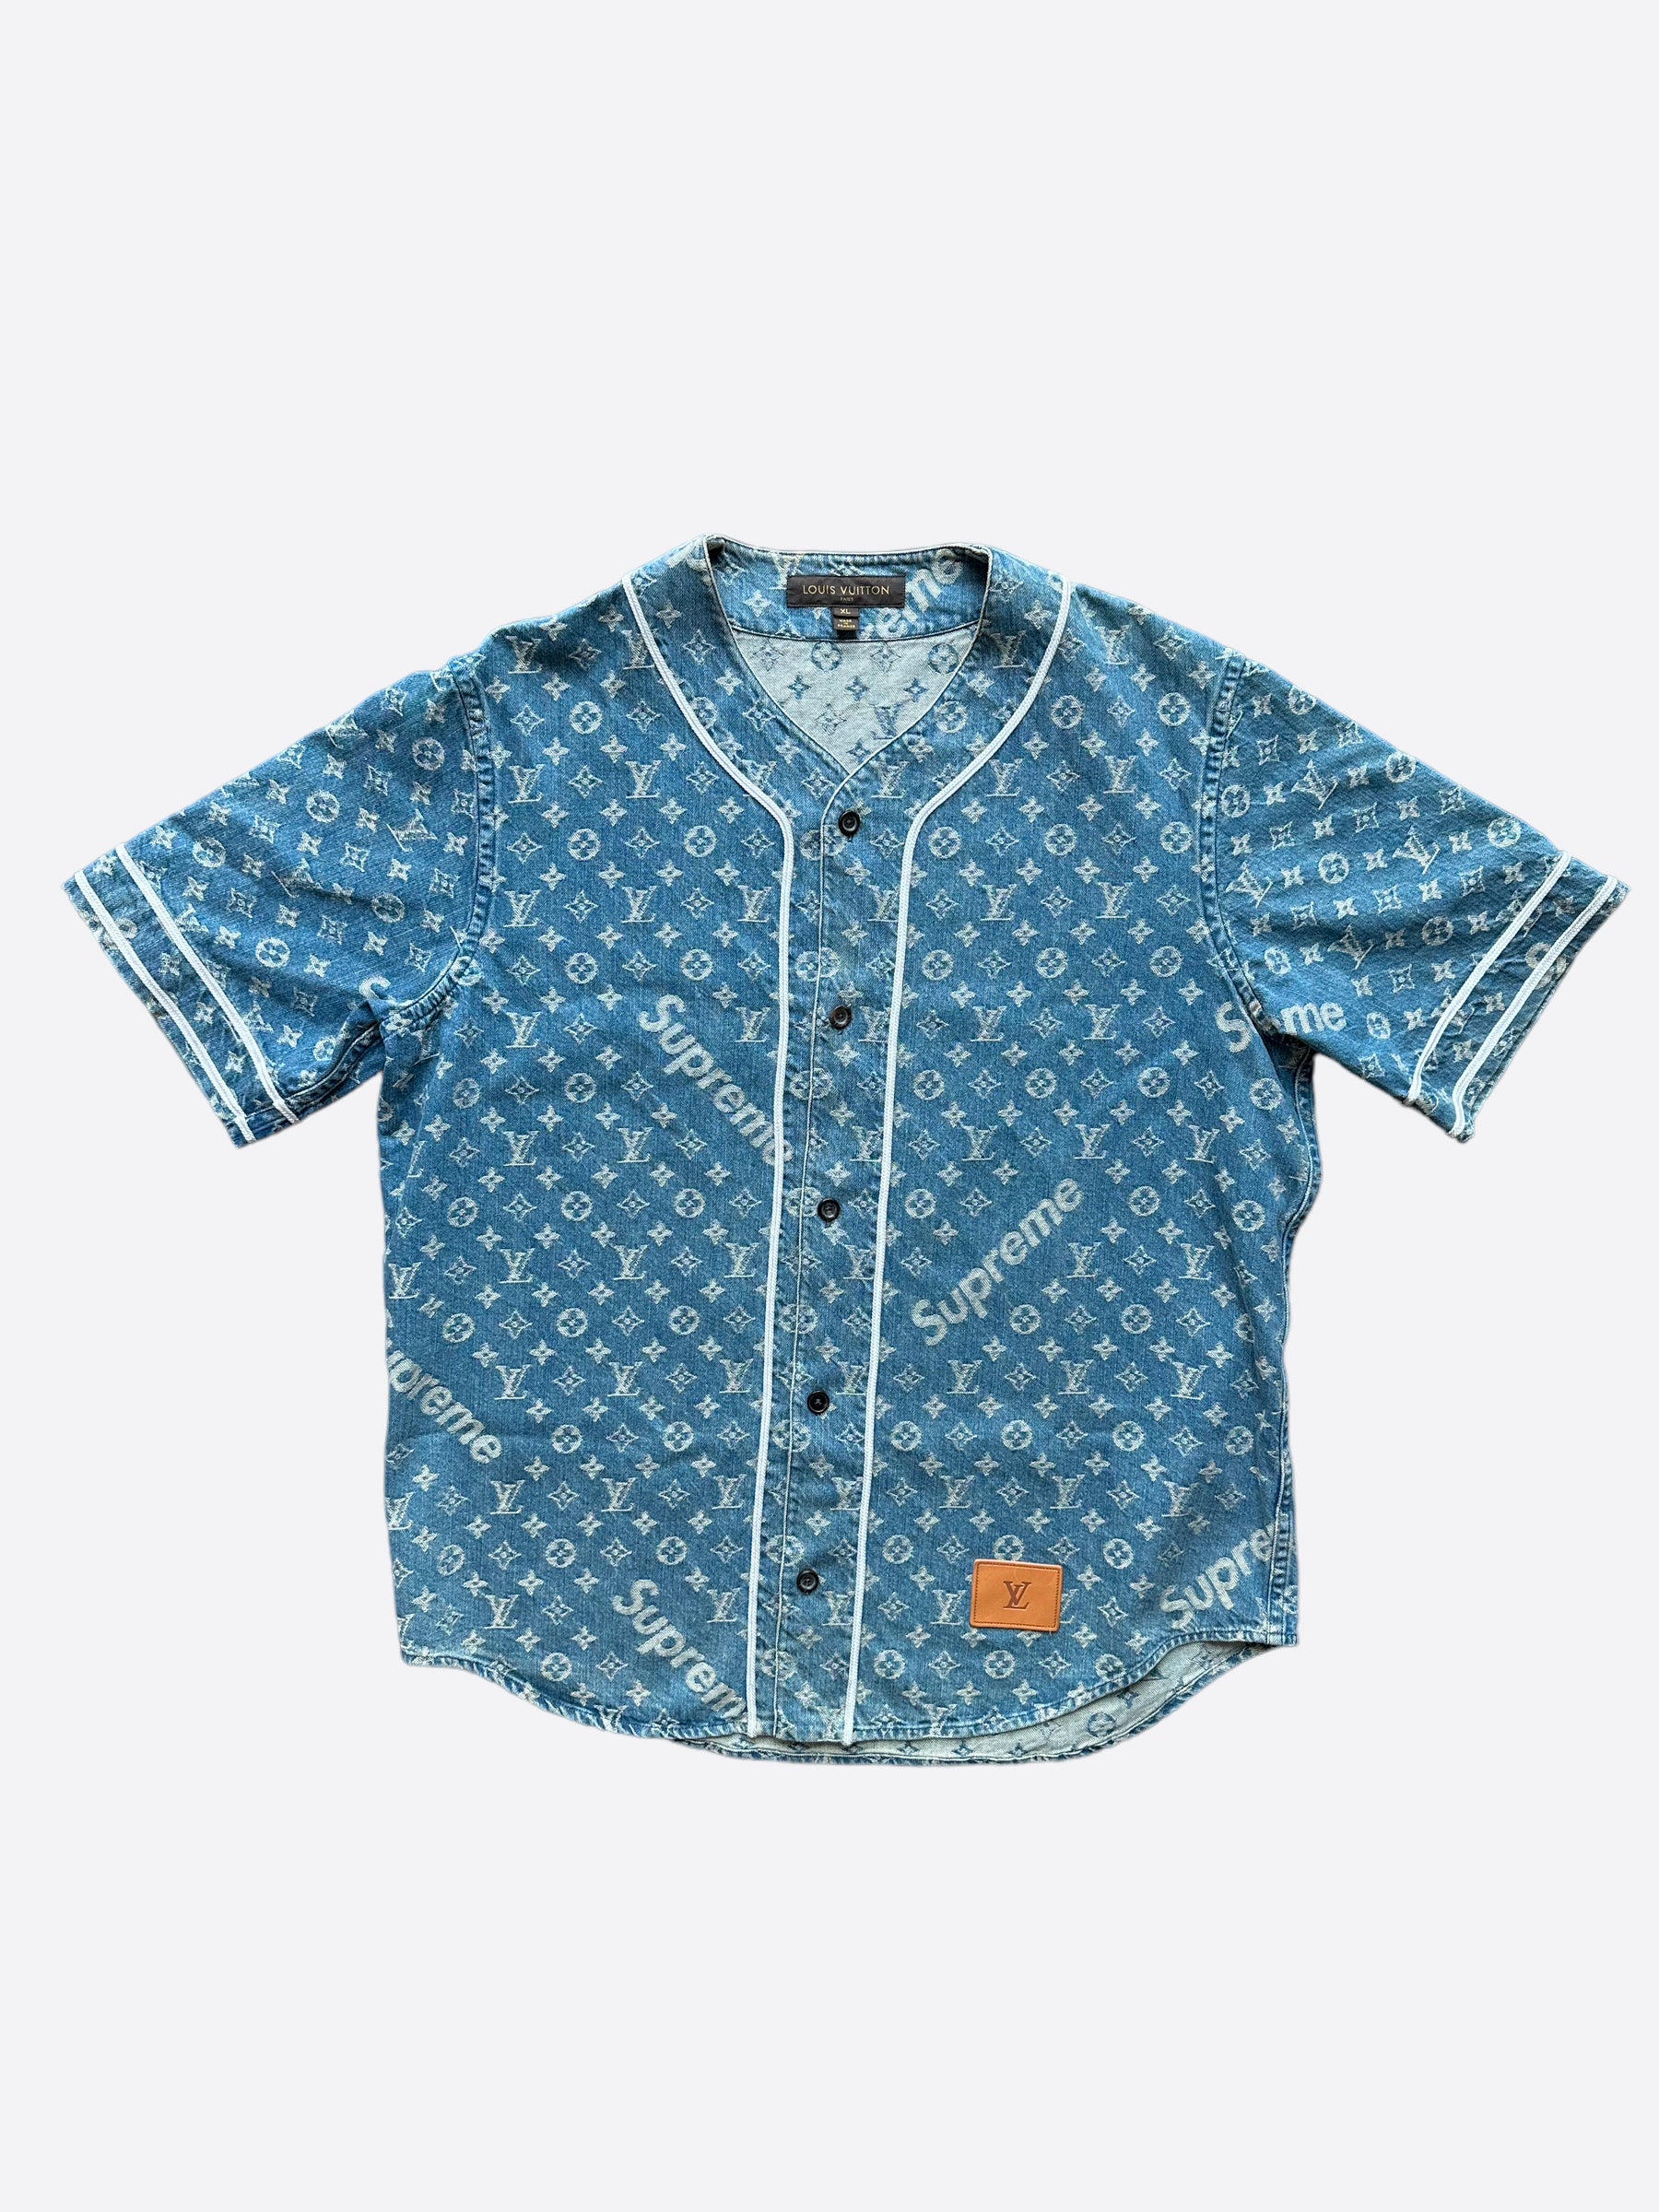 Available Now] Louis Vuitton Luxury Brand Baseball Jersey